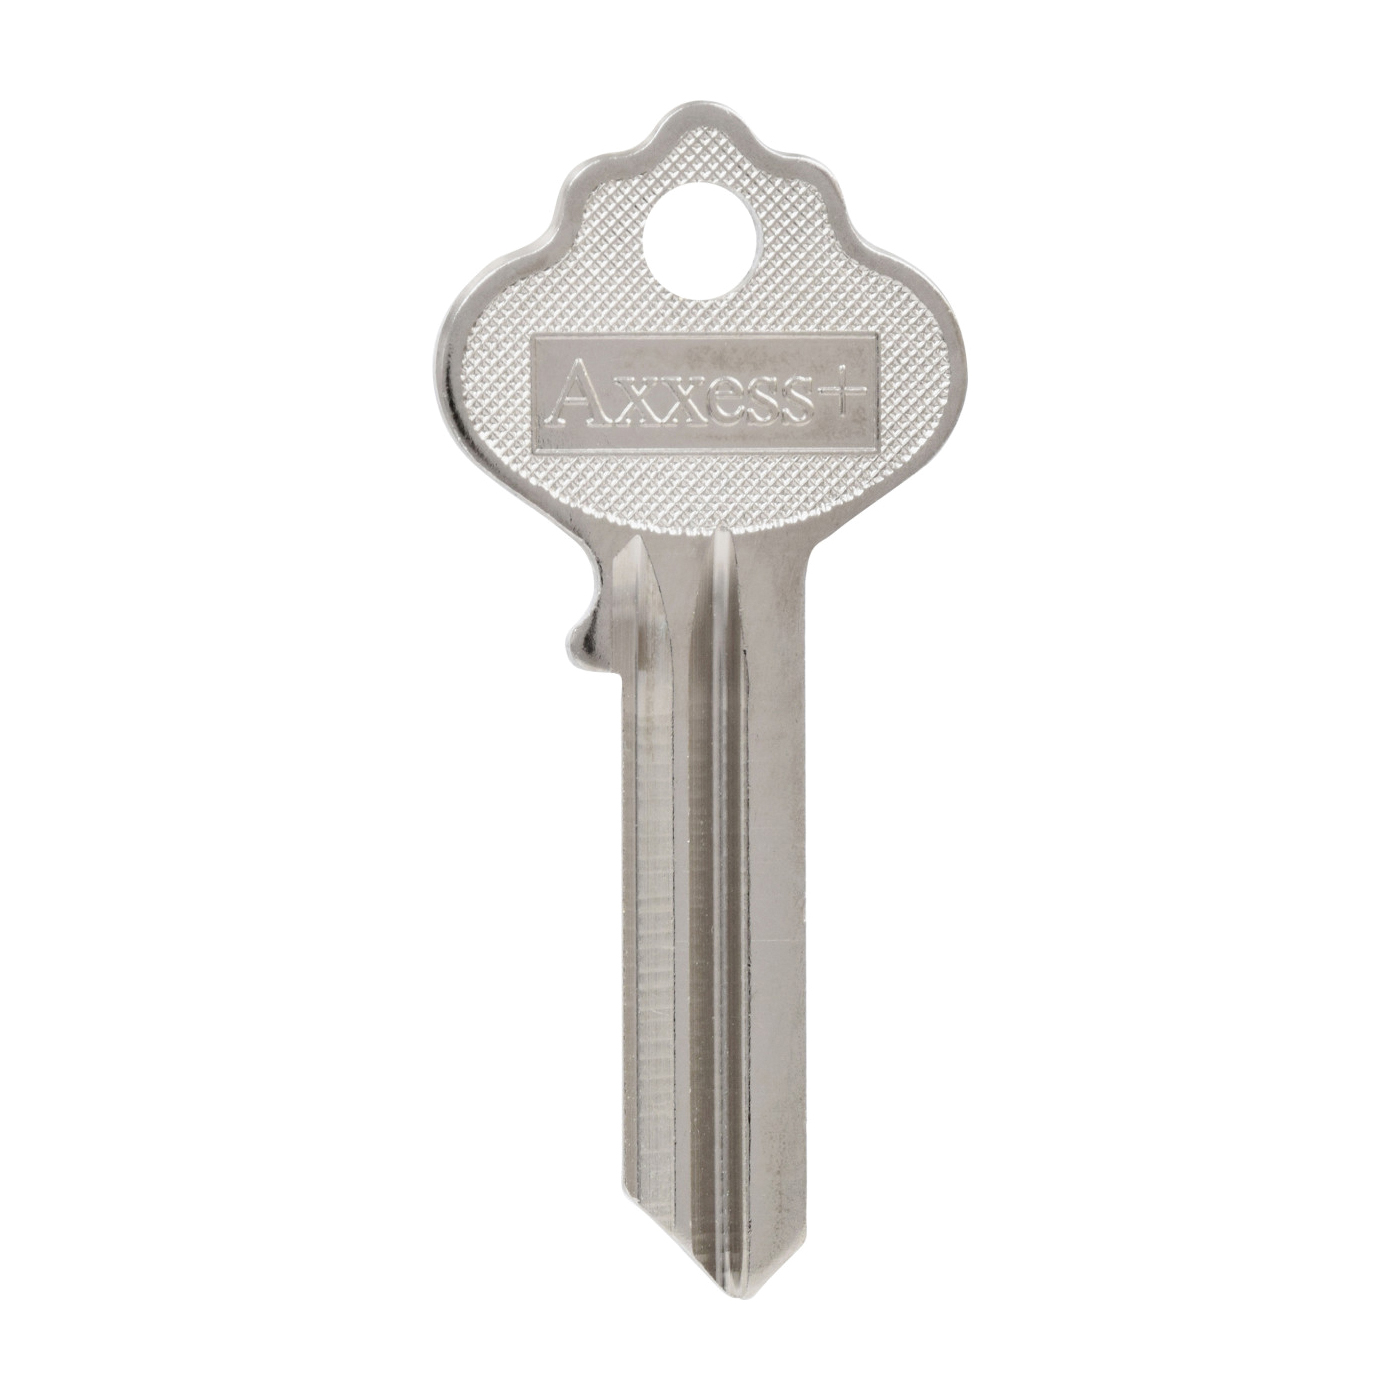 88532 Key Blank, Brass, Nickel-Plated, For: Independent Locks